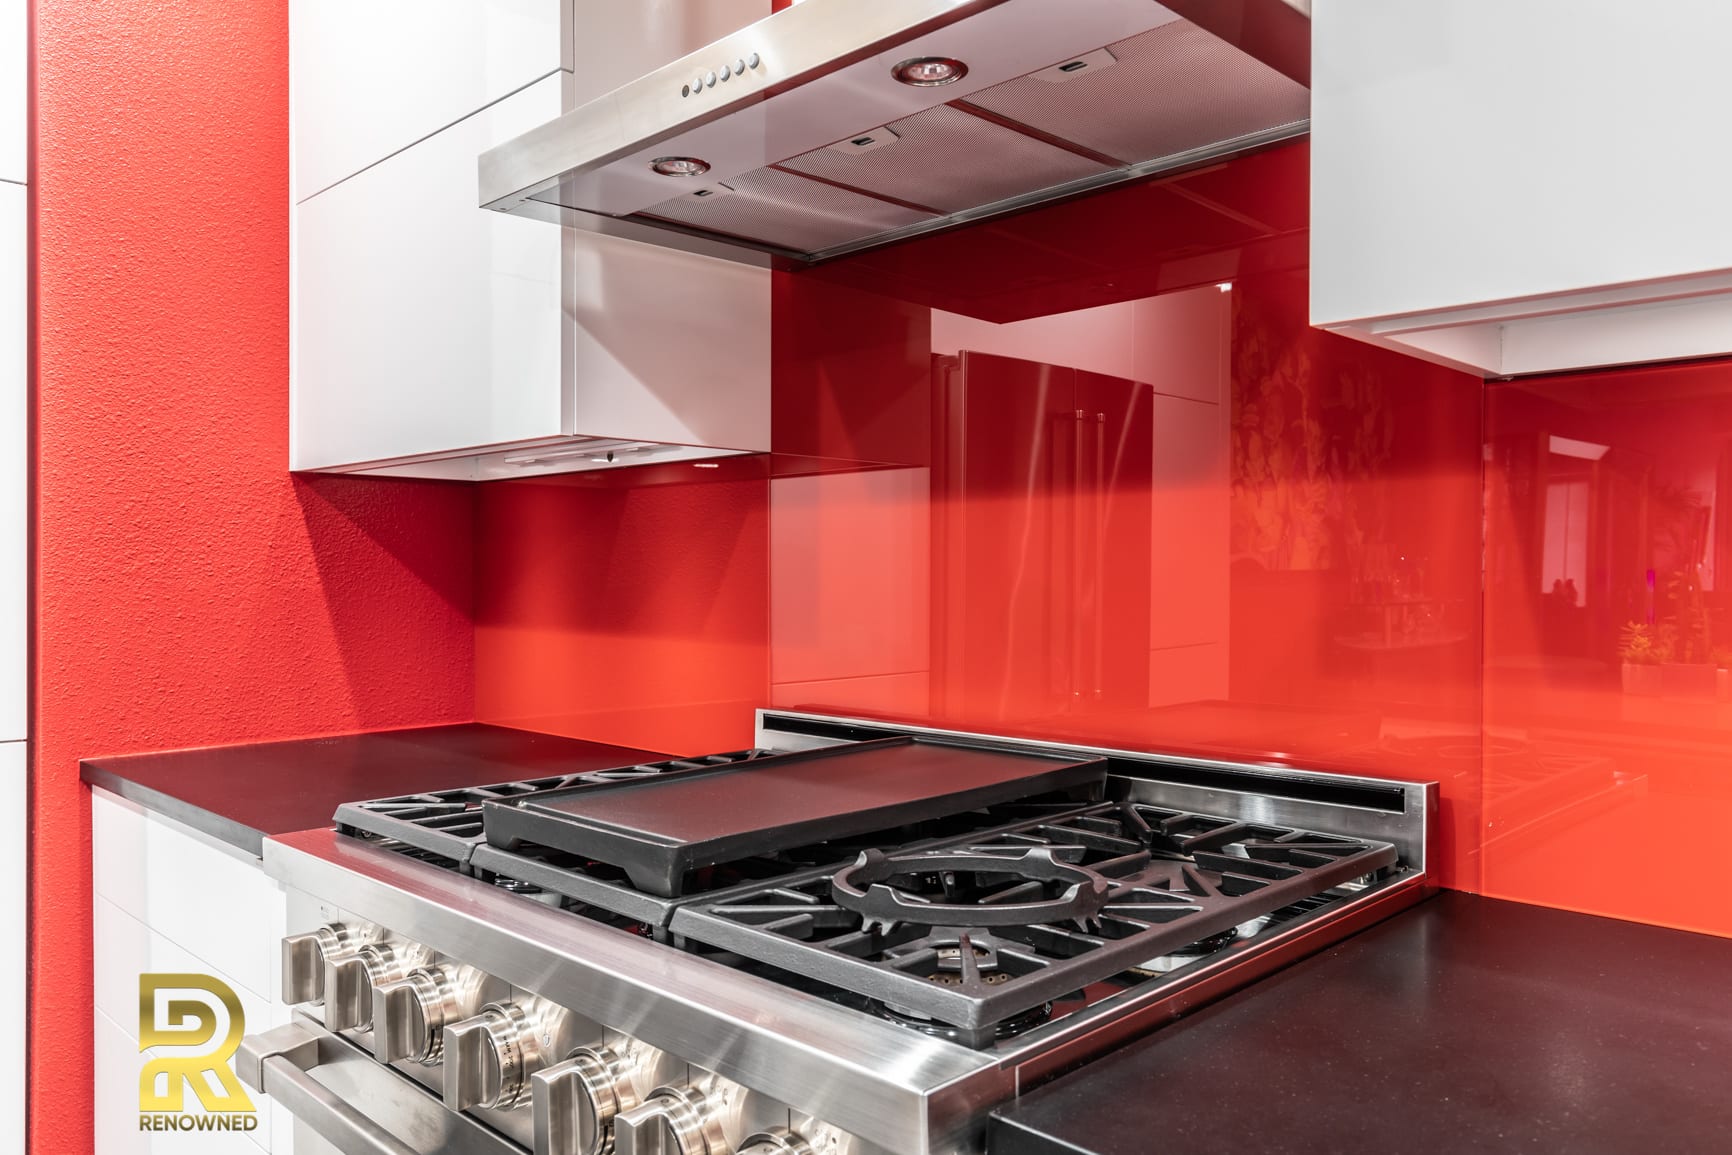 Red Hot Dallas High Rise Condo Kitchen After Remodeling by Renowned Renovation